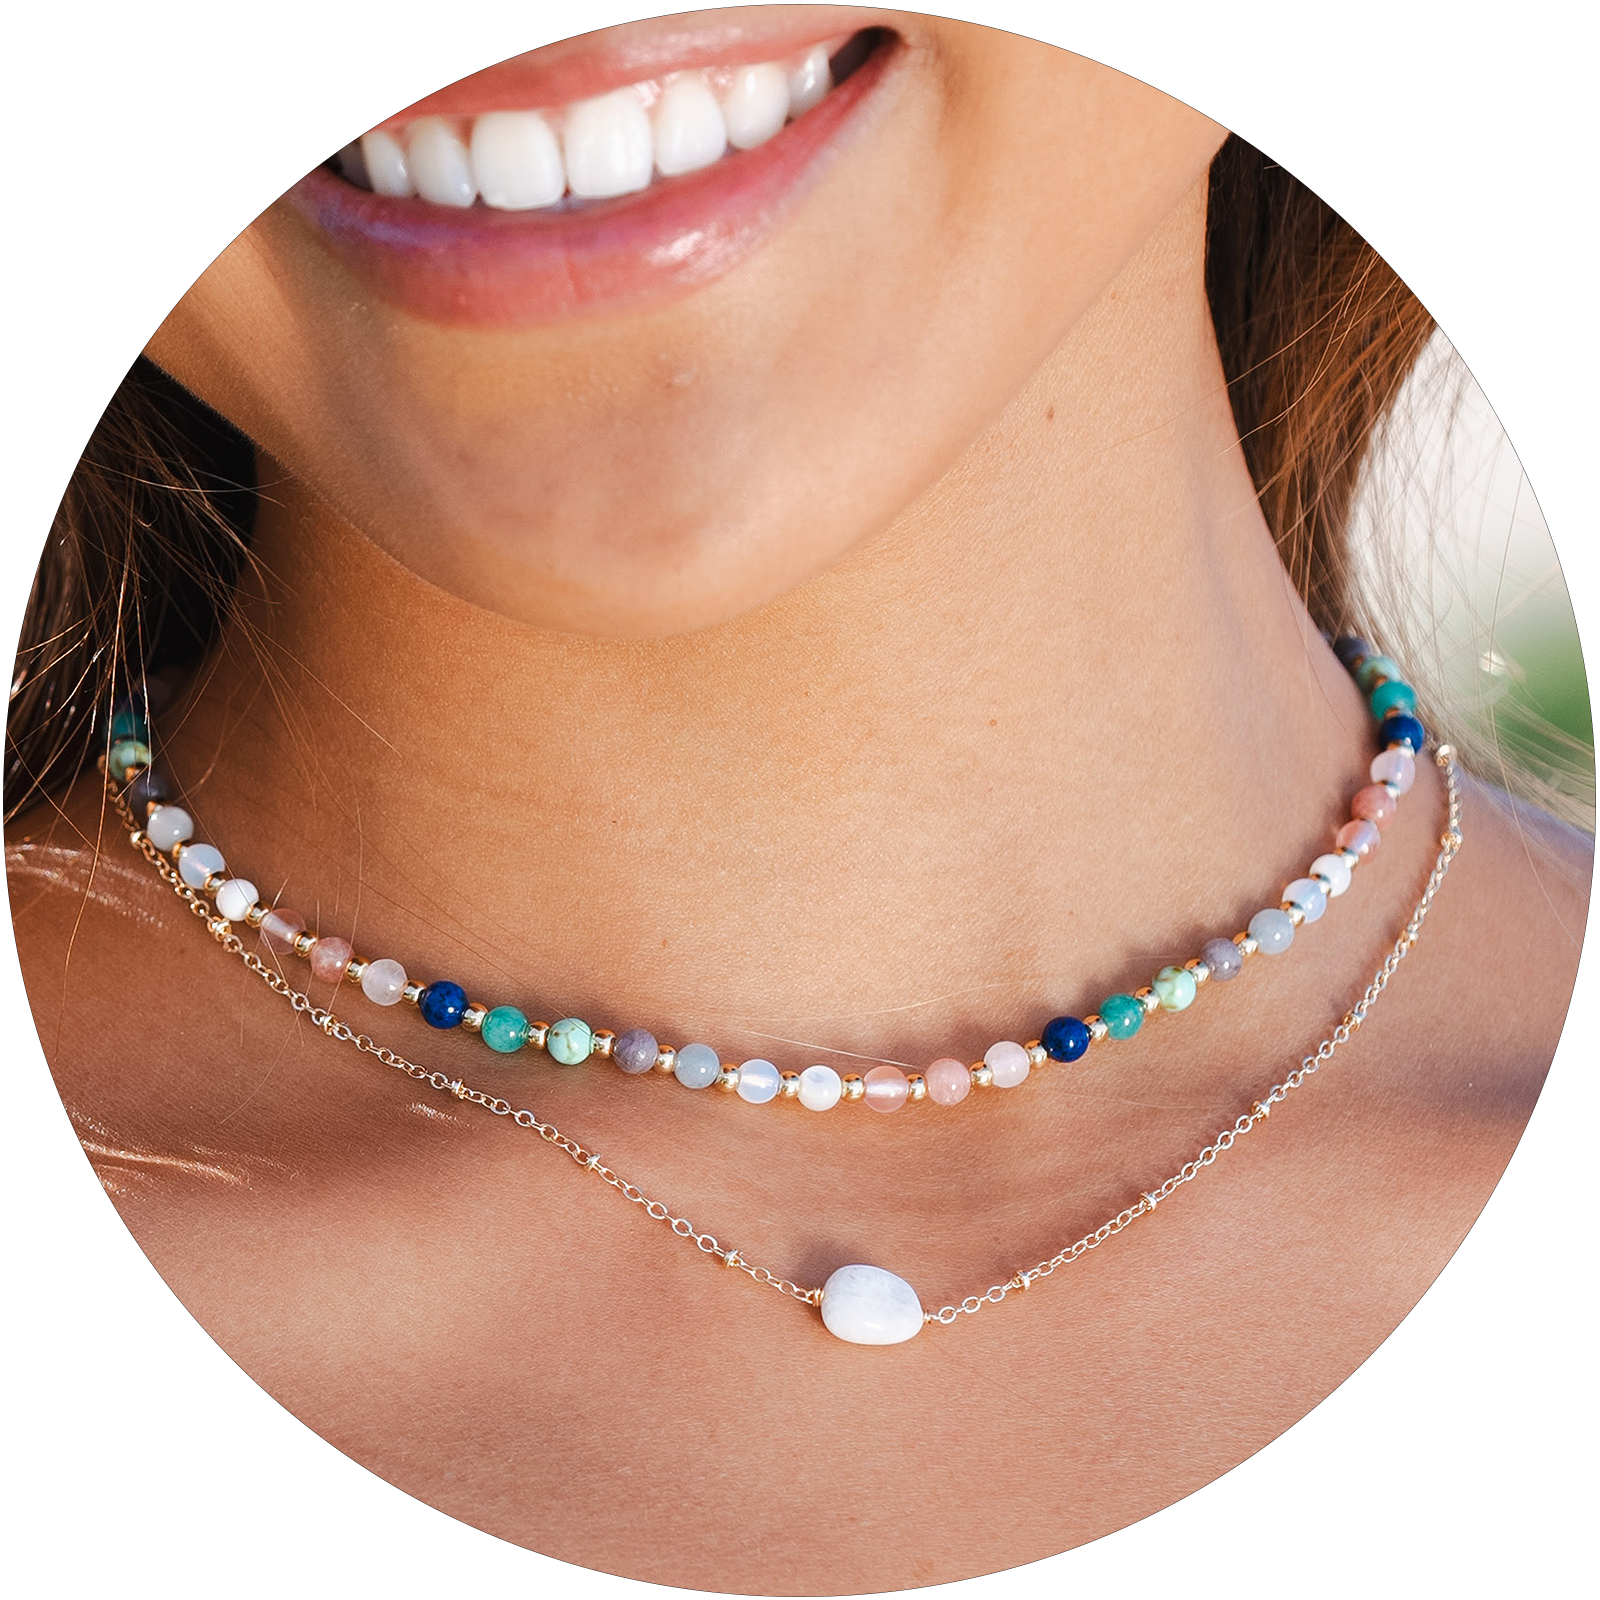 Model wearing a 4mm multicolor stone and gold bead healing necklace and a moonstone healing necklace with a gold chain.